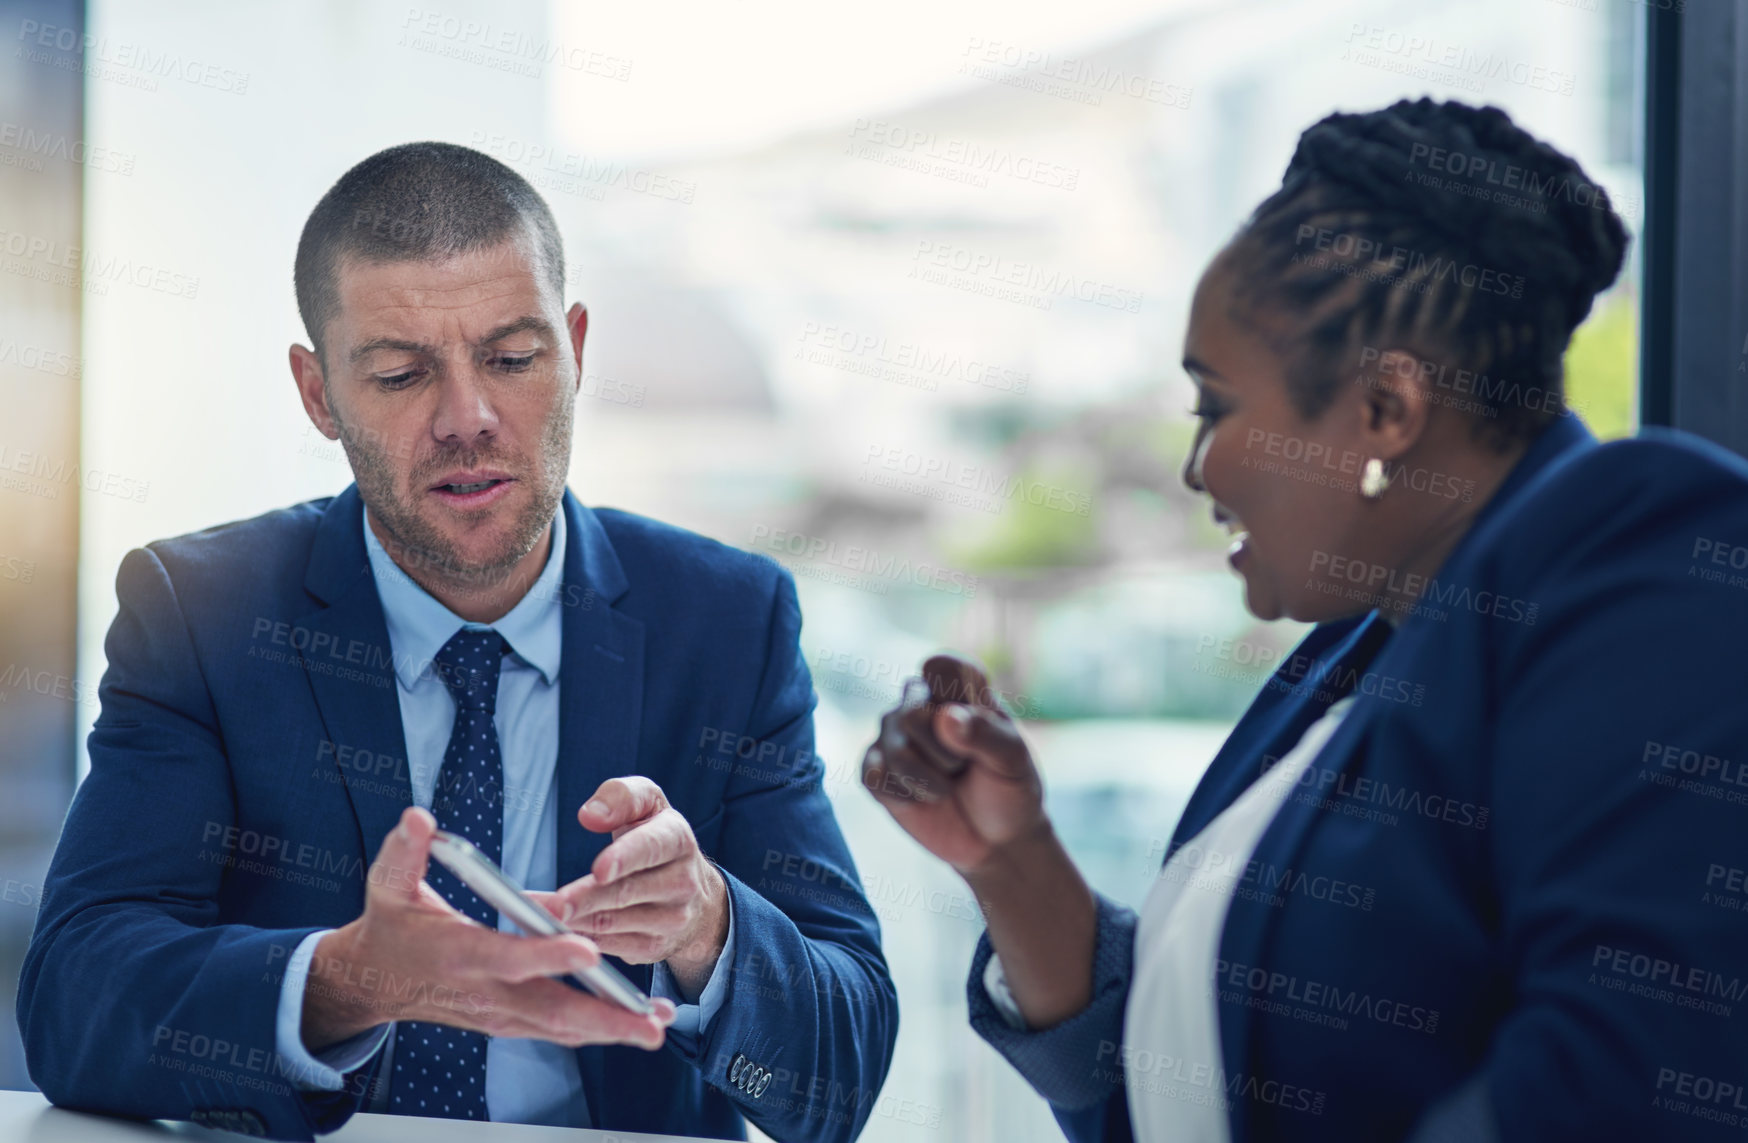 Buy stock photo Cropped shot of two businesspeople meeting in the boardroom